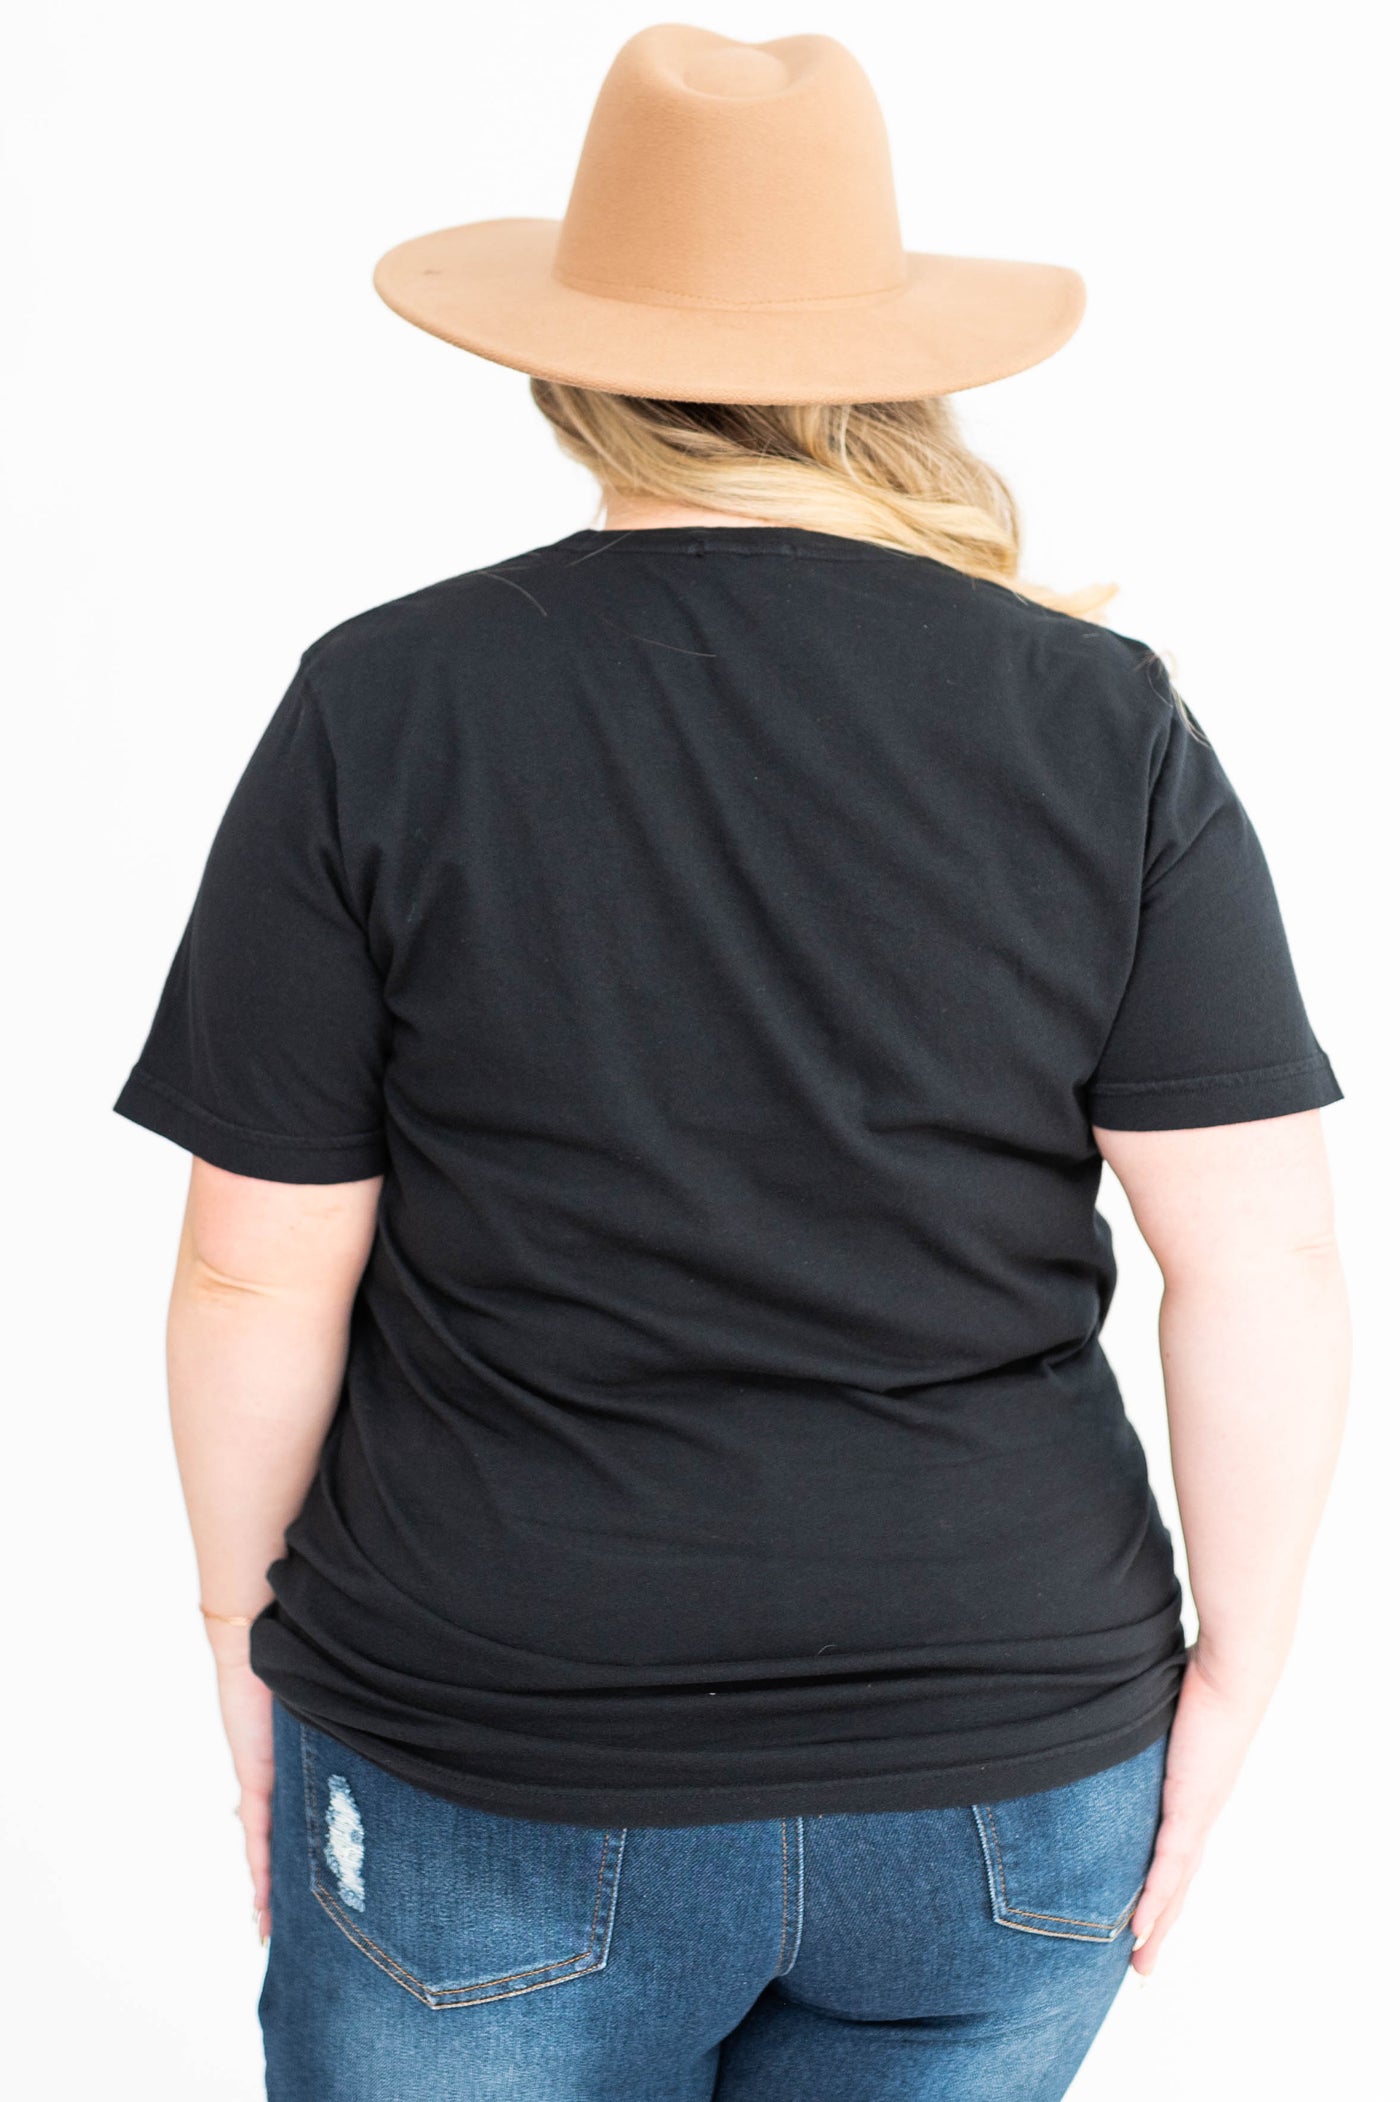 Back view of a cowboy black tee